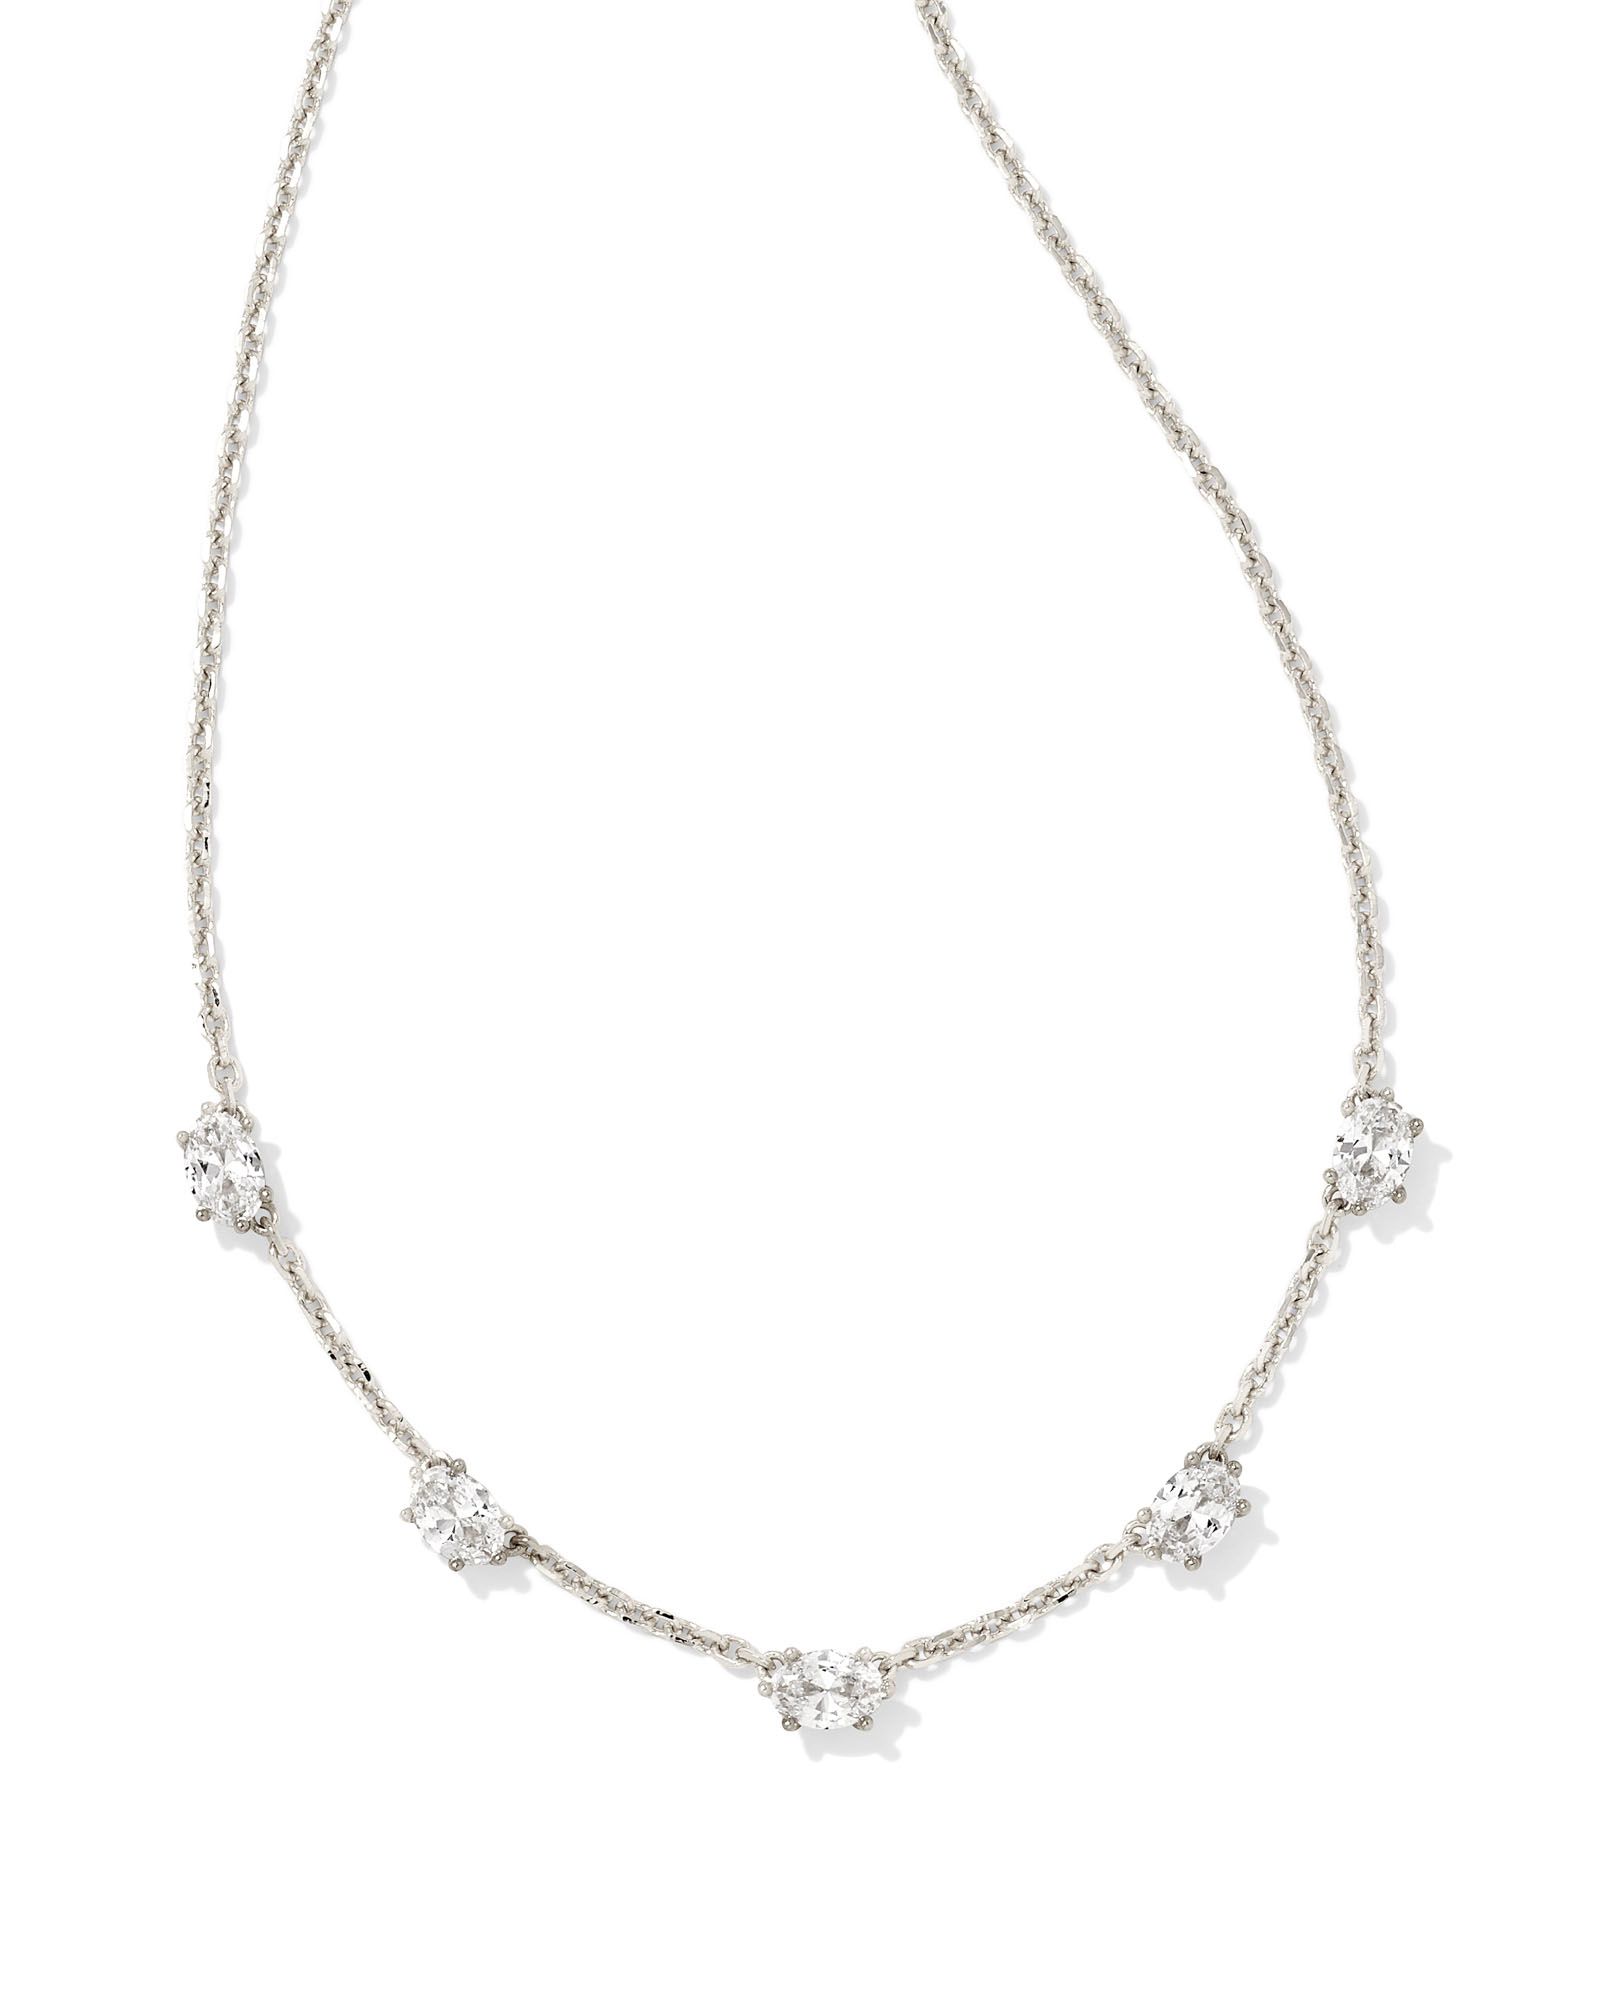 Cailin Silver Crystal Strand Necklace in White Crystal | Kendra Scott | Kendra Scott